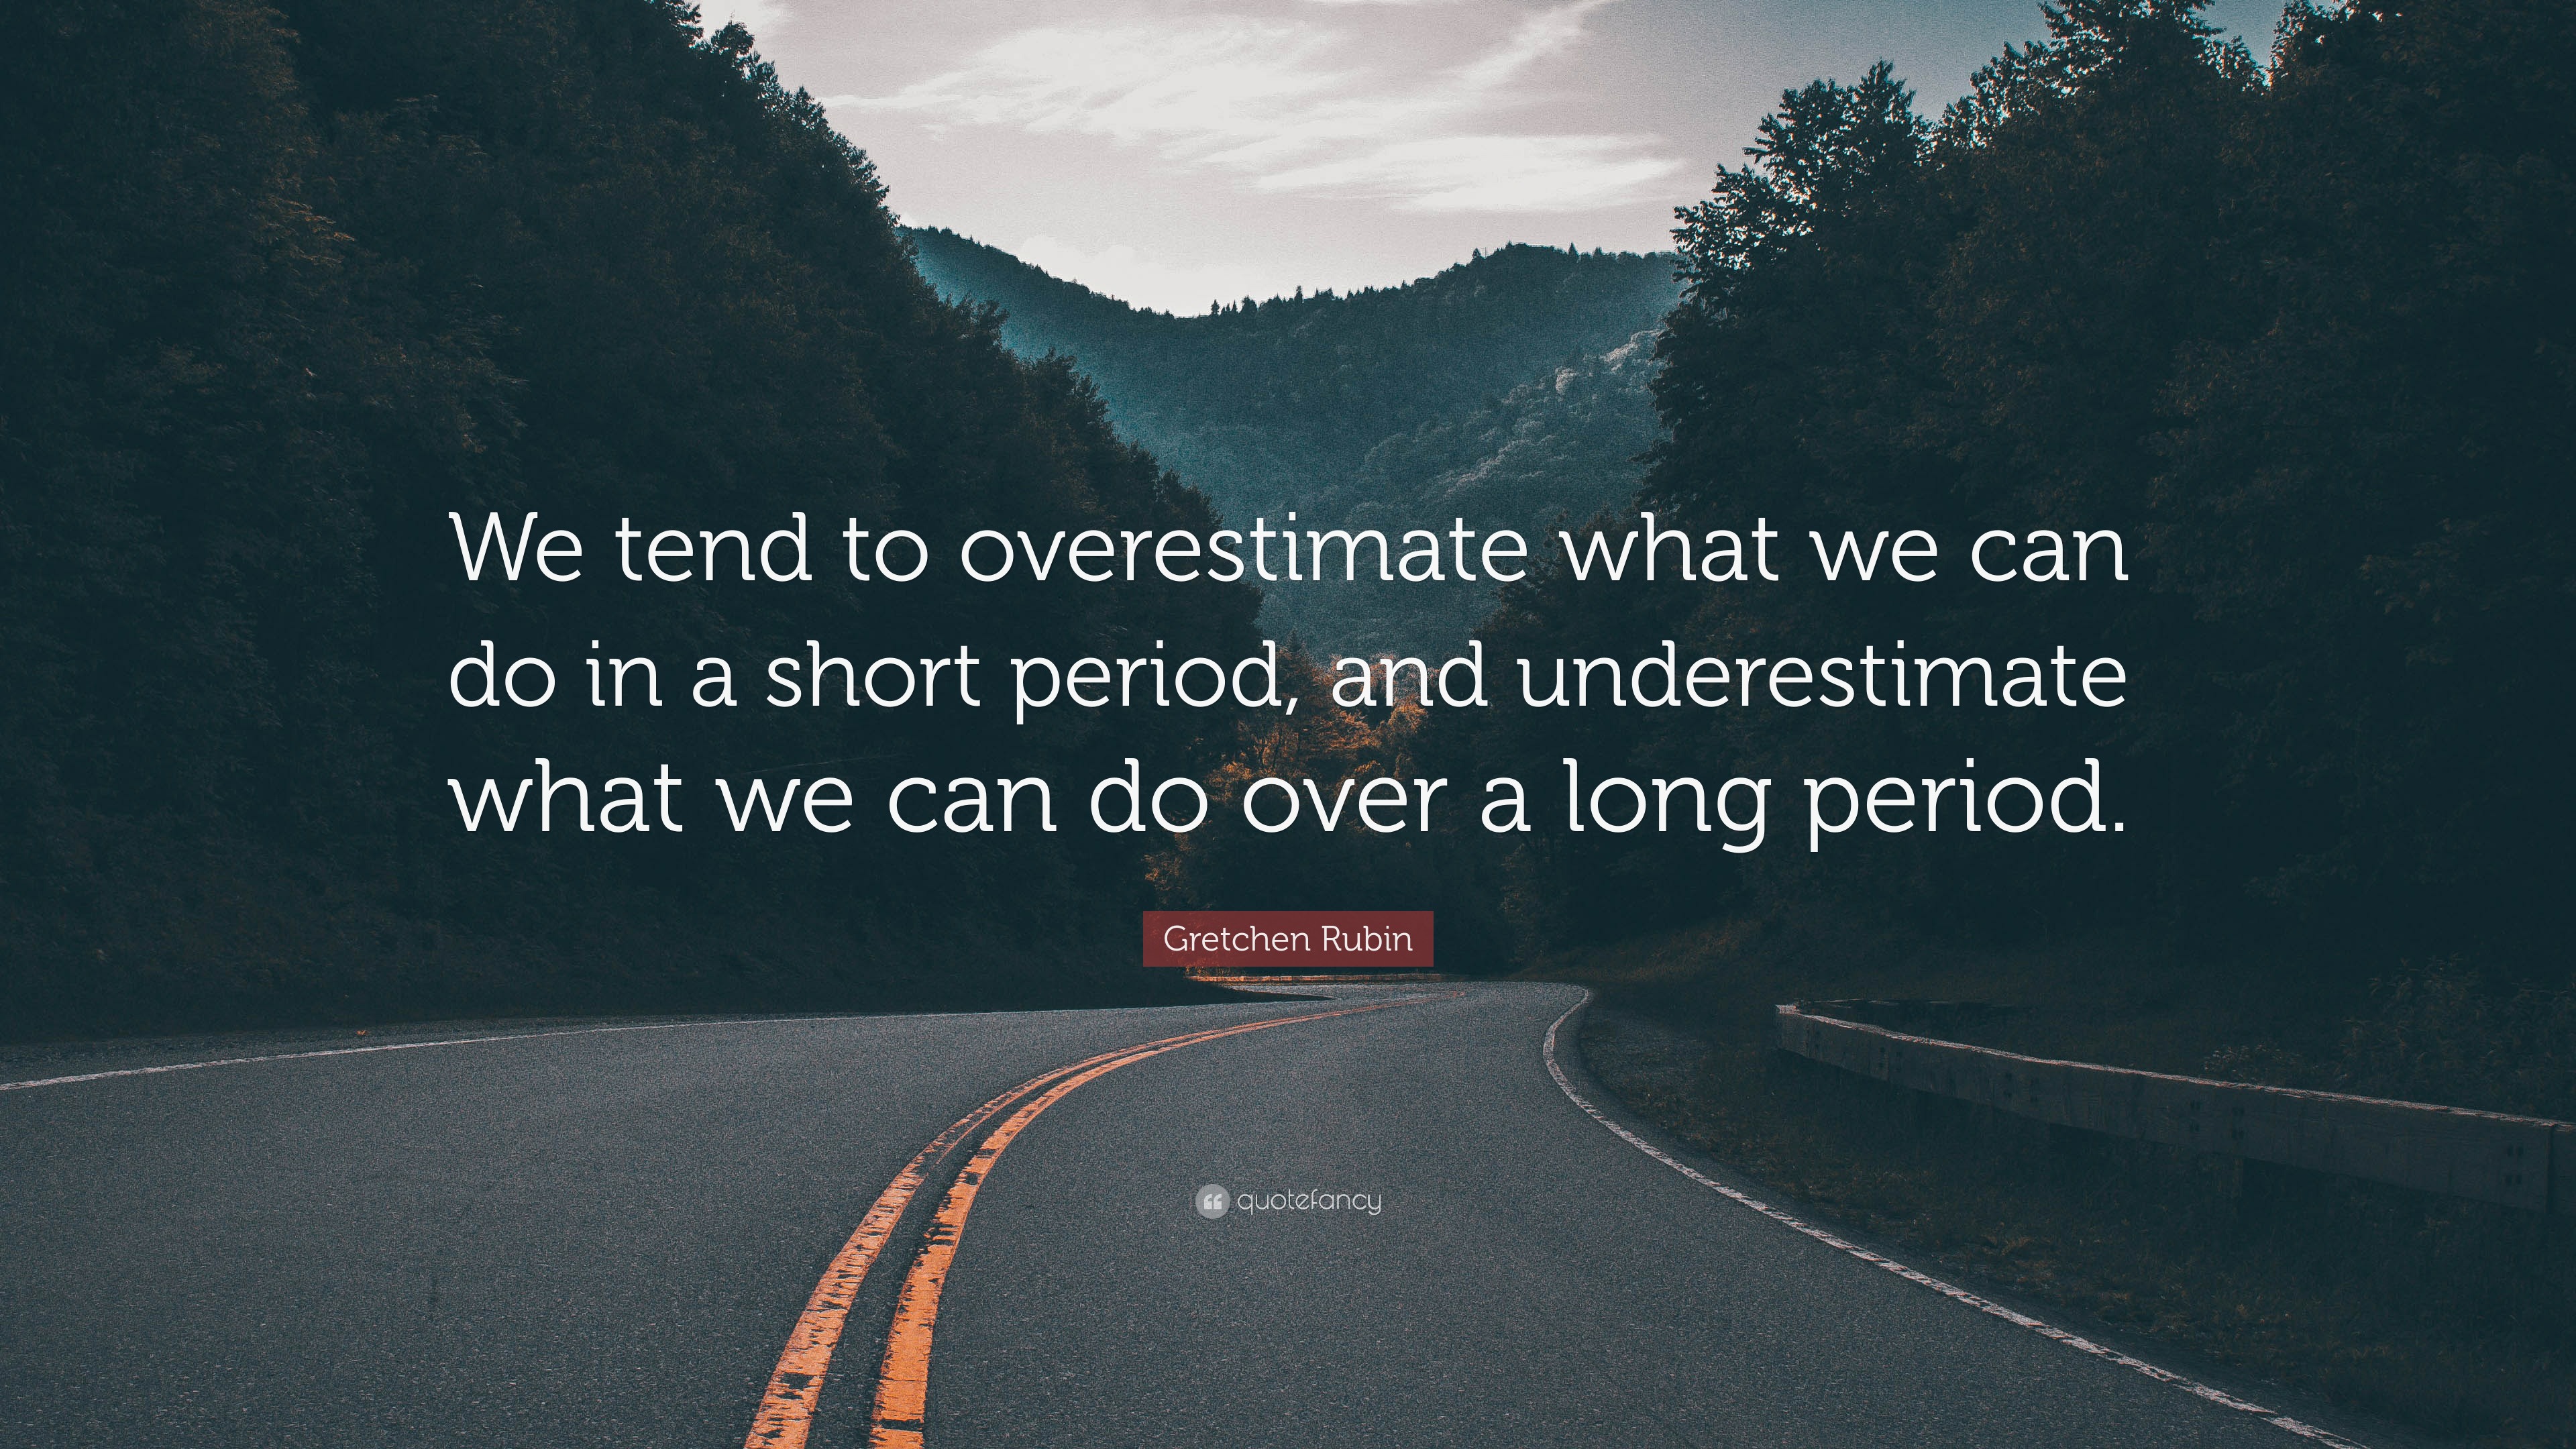 Gretchen Rubin Quote: "We tend to overestimate what we can d